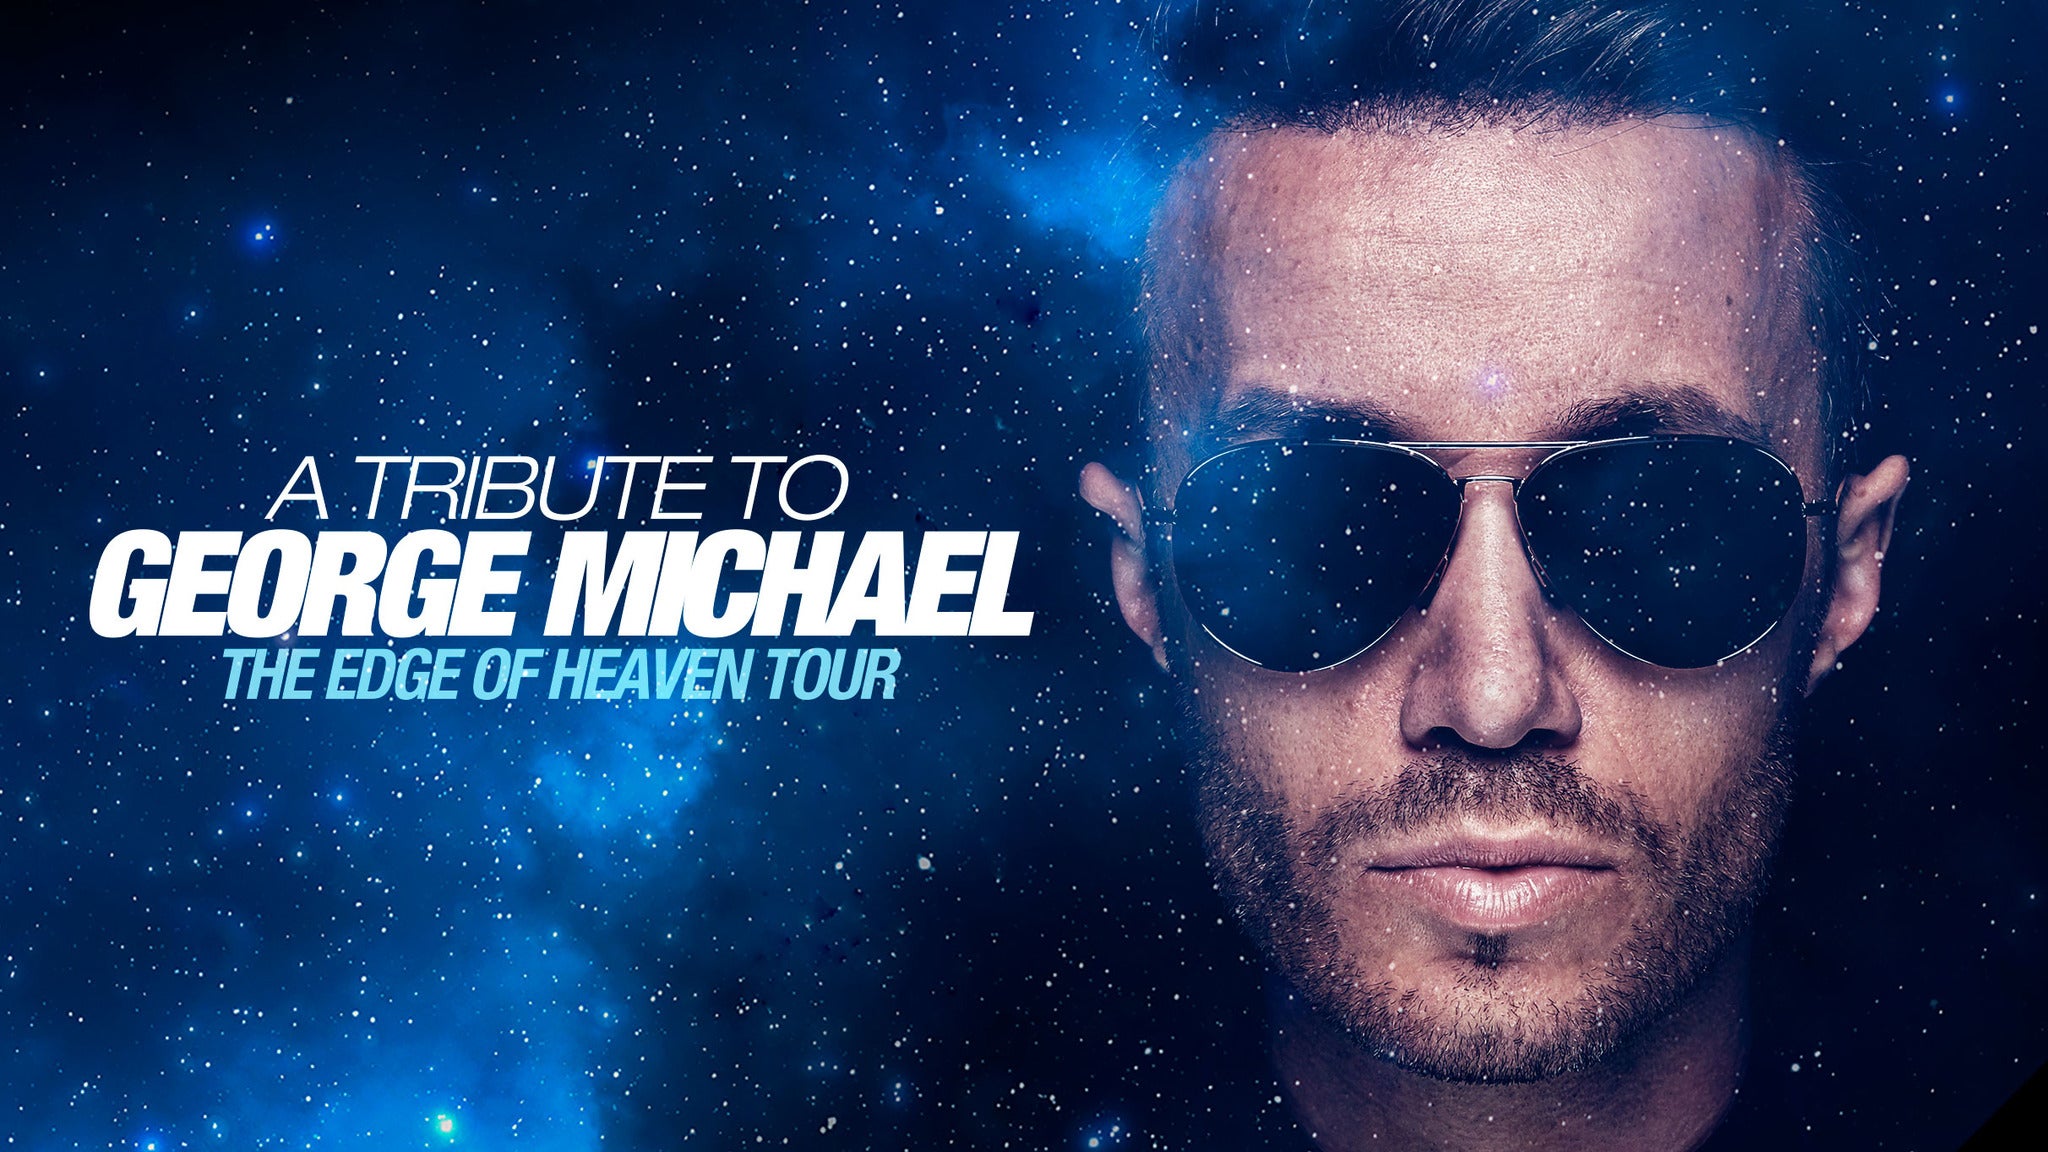 Image used with permission from Ticketmaster | The Life and Music of George Michael tickets